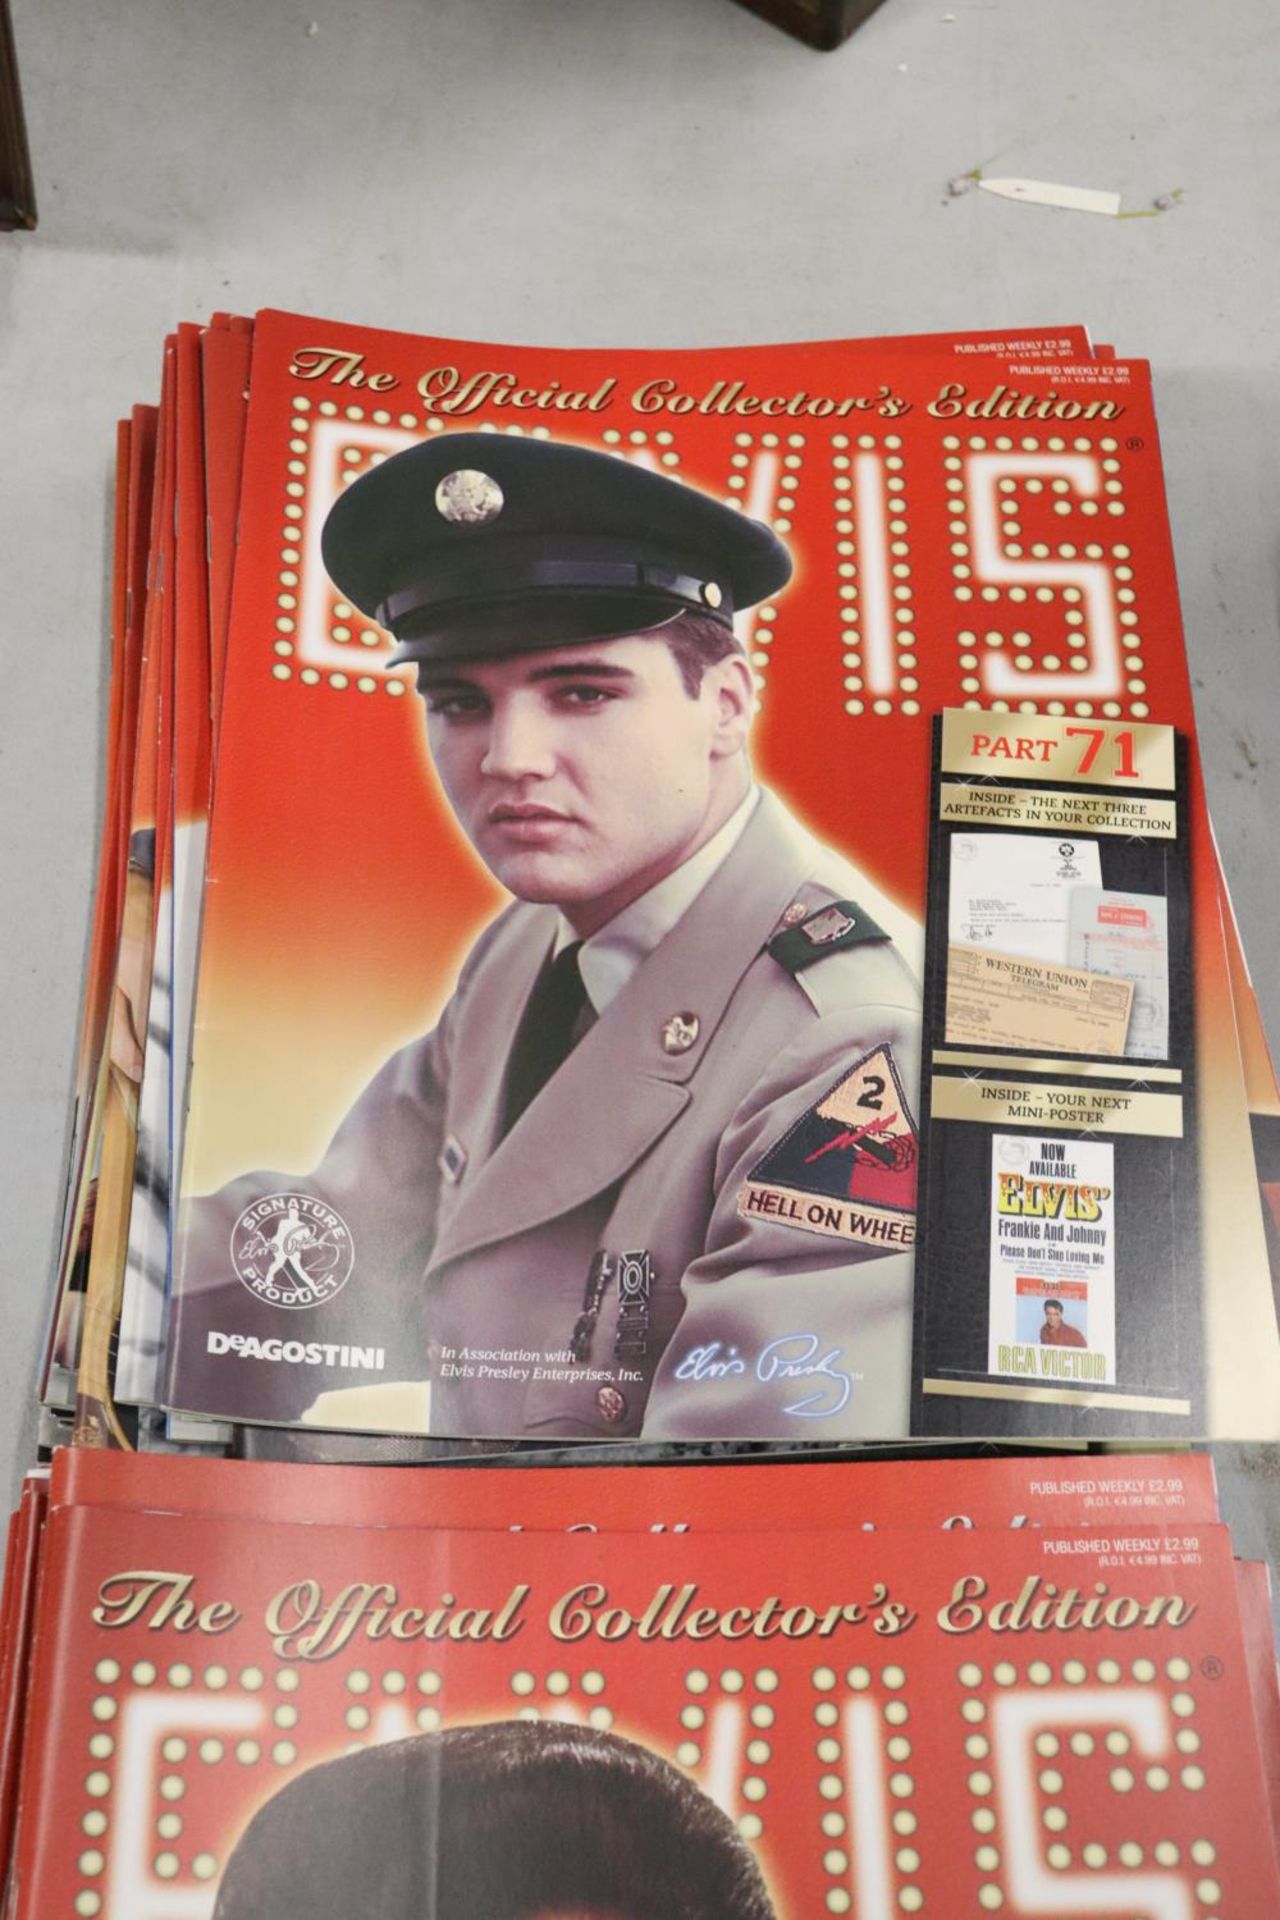 A LARGE QUANTITY OF OFFICIAL COLLECTOR'S EDITIONS, 'ELVIS' BY DEAGOSTINI, IN GOOD CONDITION - Image 4 of 5